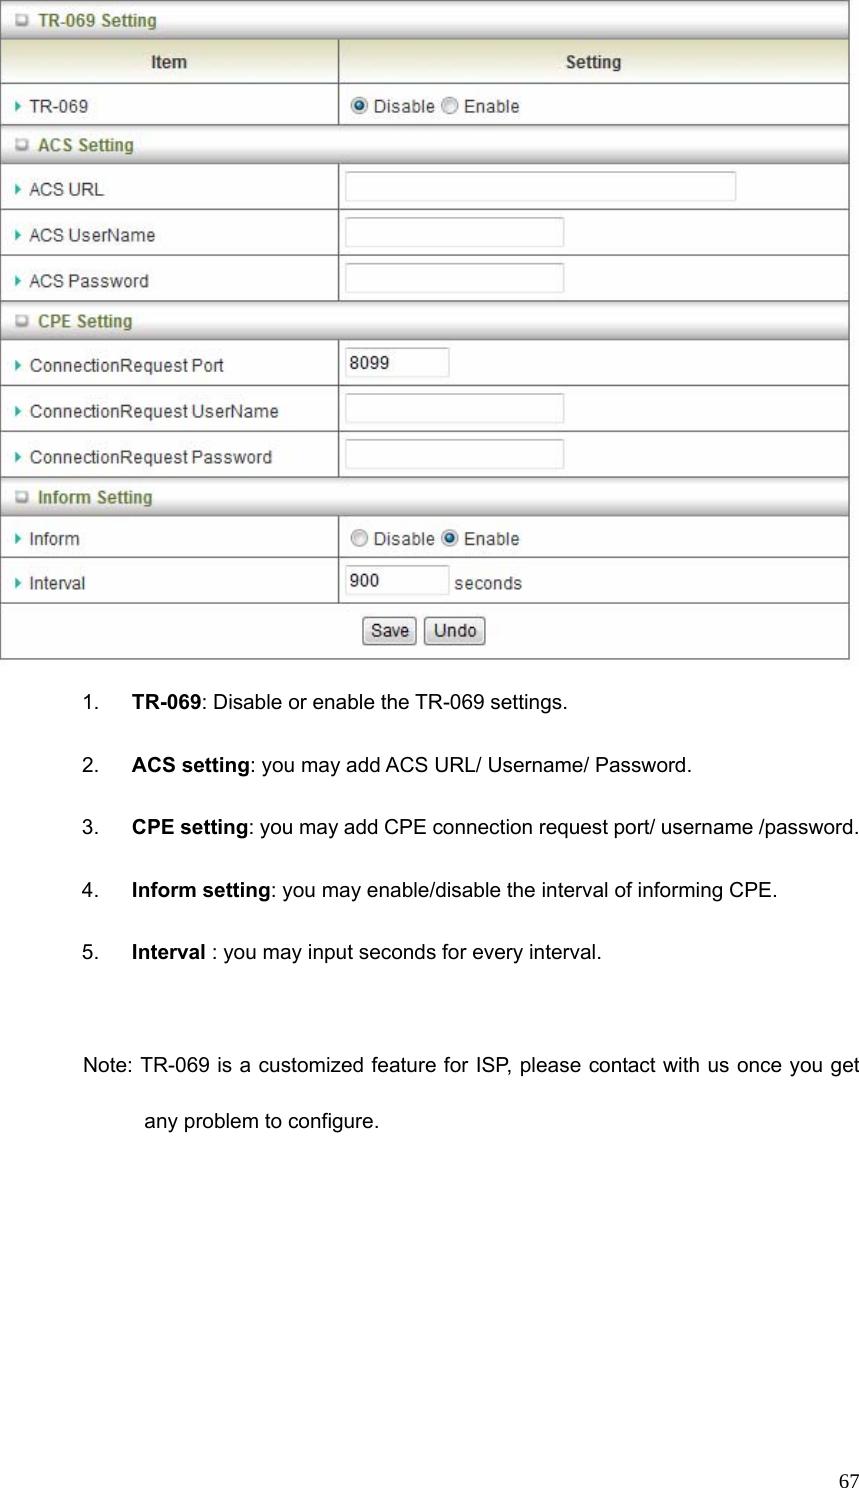  67 1.  TR-069: Disable or enable the TR-069 settings.   2.  ACS setting: you may add ACS URL/ Username/ Password. 3.  CPE setting: you may add CPE connection request port/ username /password. 4.  Inform setting: you may enable/disable the interval of informing CPE. 5.  Interval : you may input seconds for every interval.  Note: TR-069 is a customized feature for ISP, please contact with us once you get any problem to configure. 